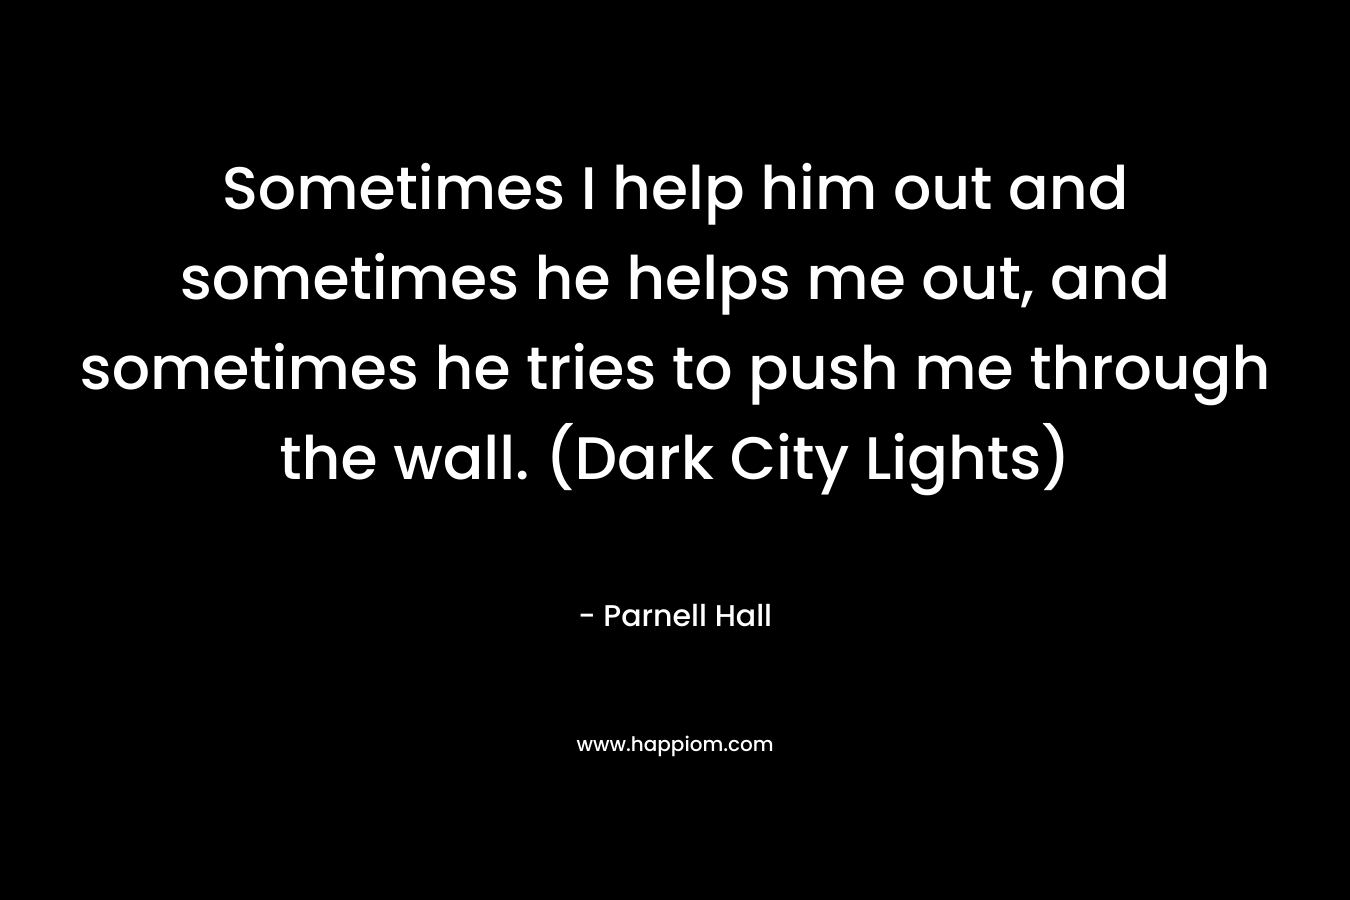 Sometimes I help him out and sometimes he helps me out, and sometimes he tries to push me through the wall. (Dark City Lights)